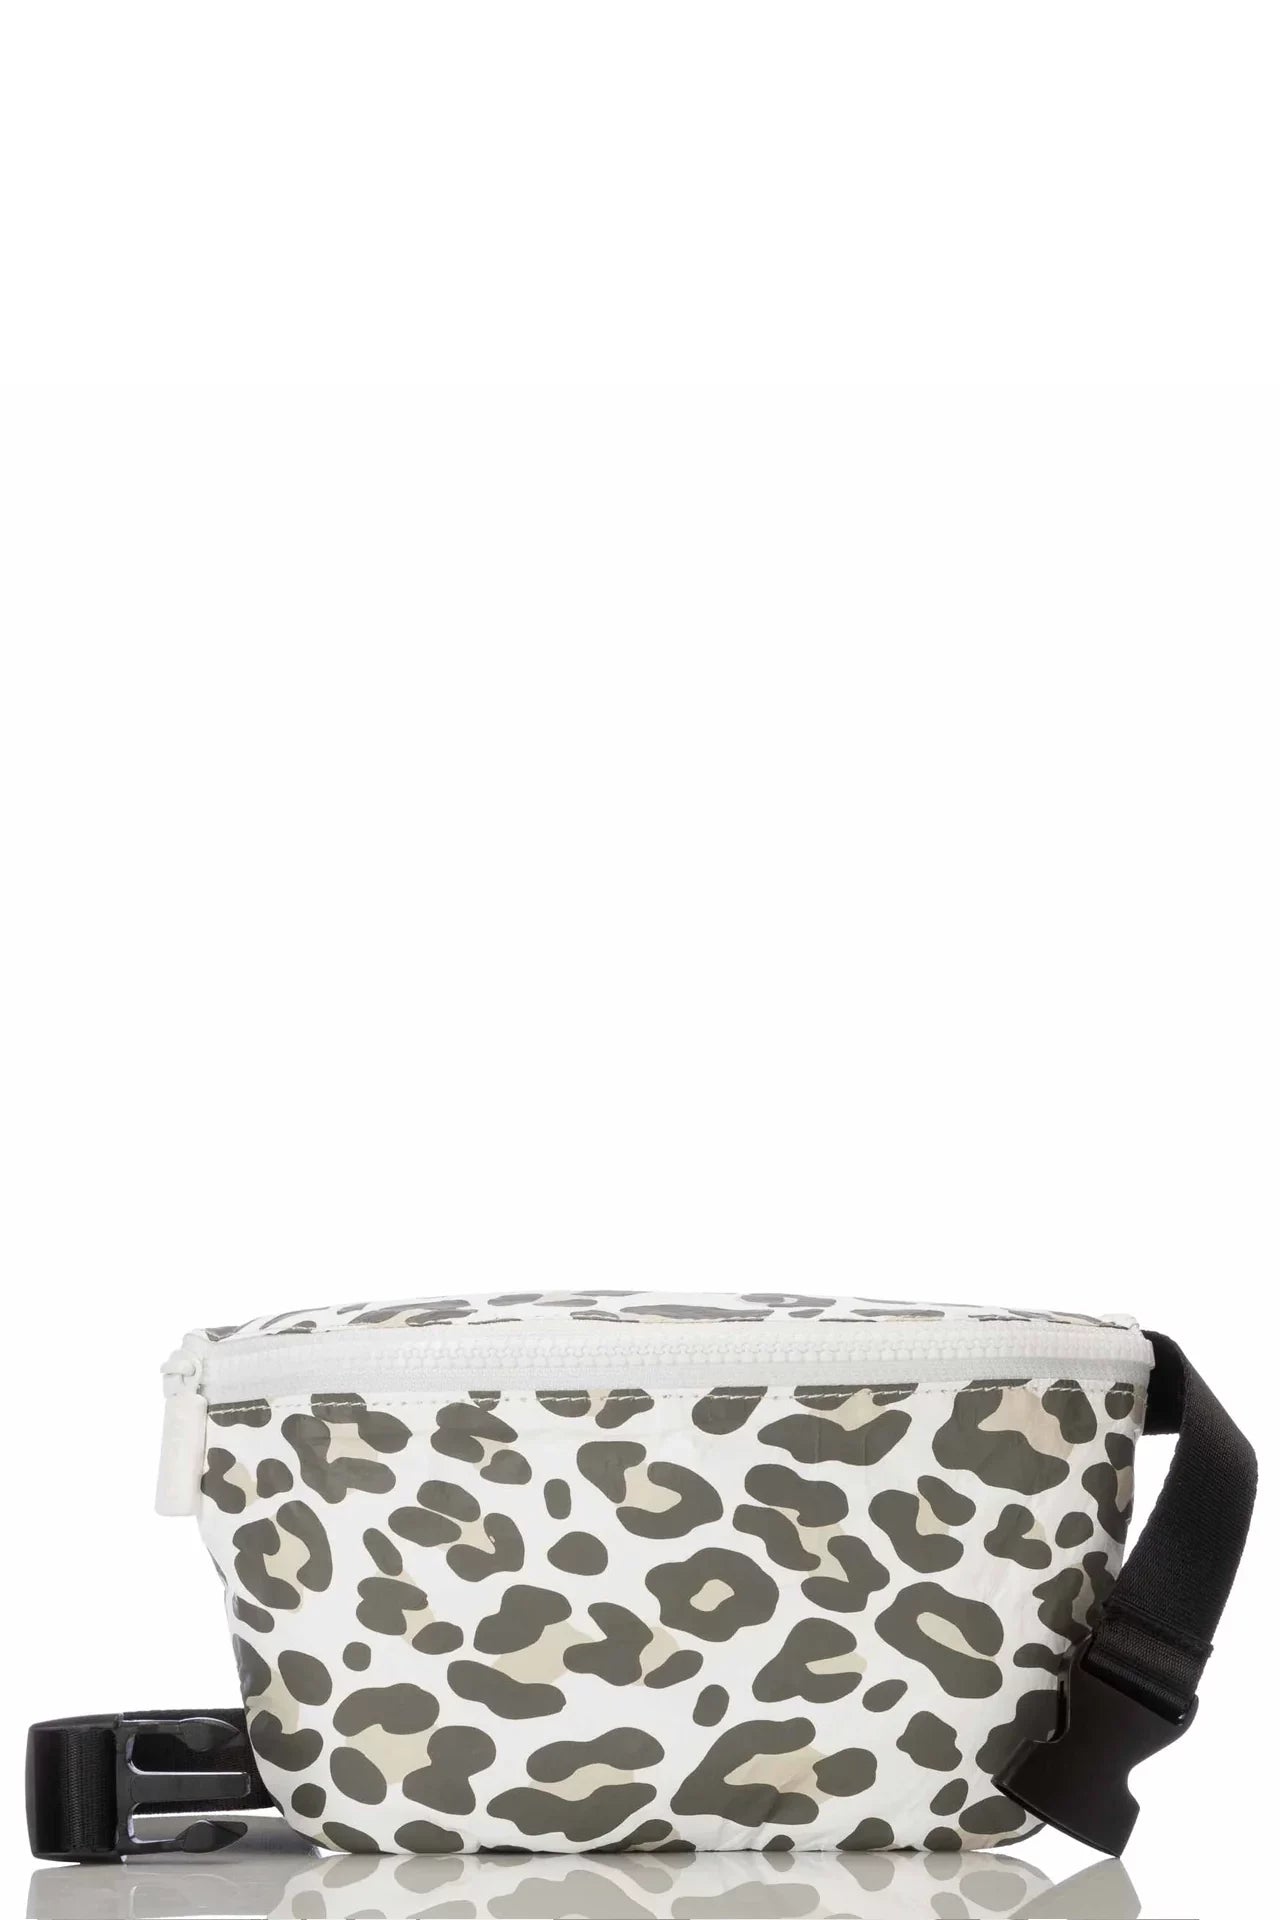 Snow Leopard Hip Pack Accessories Aloha   